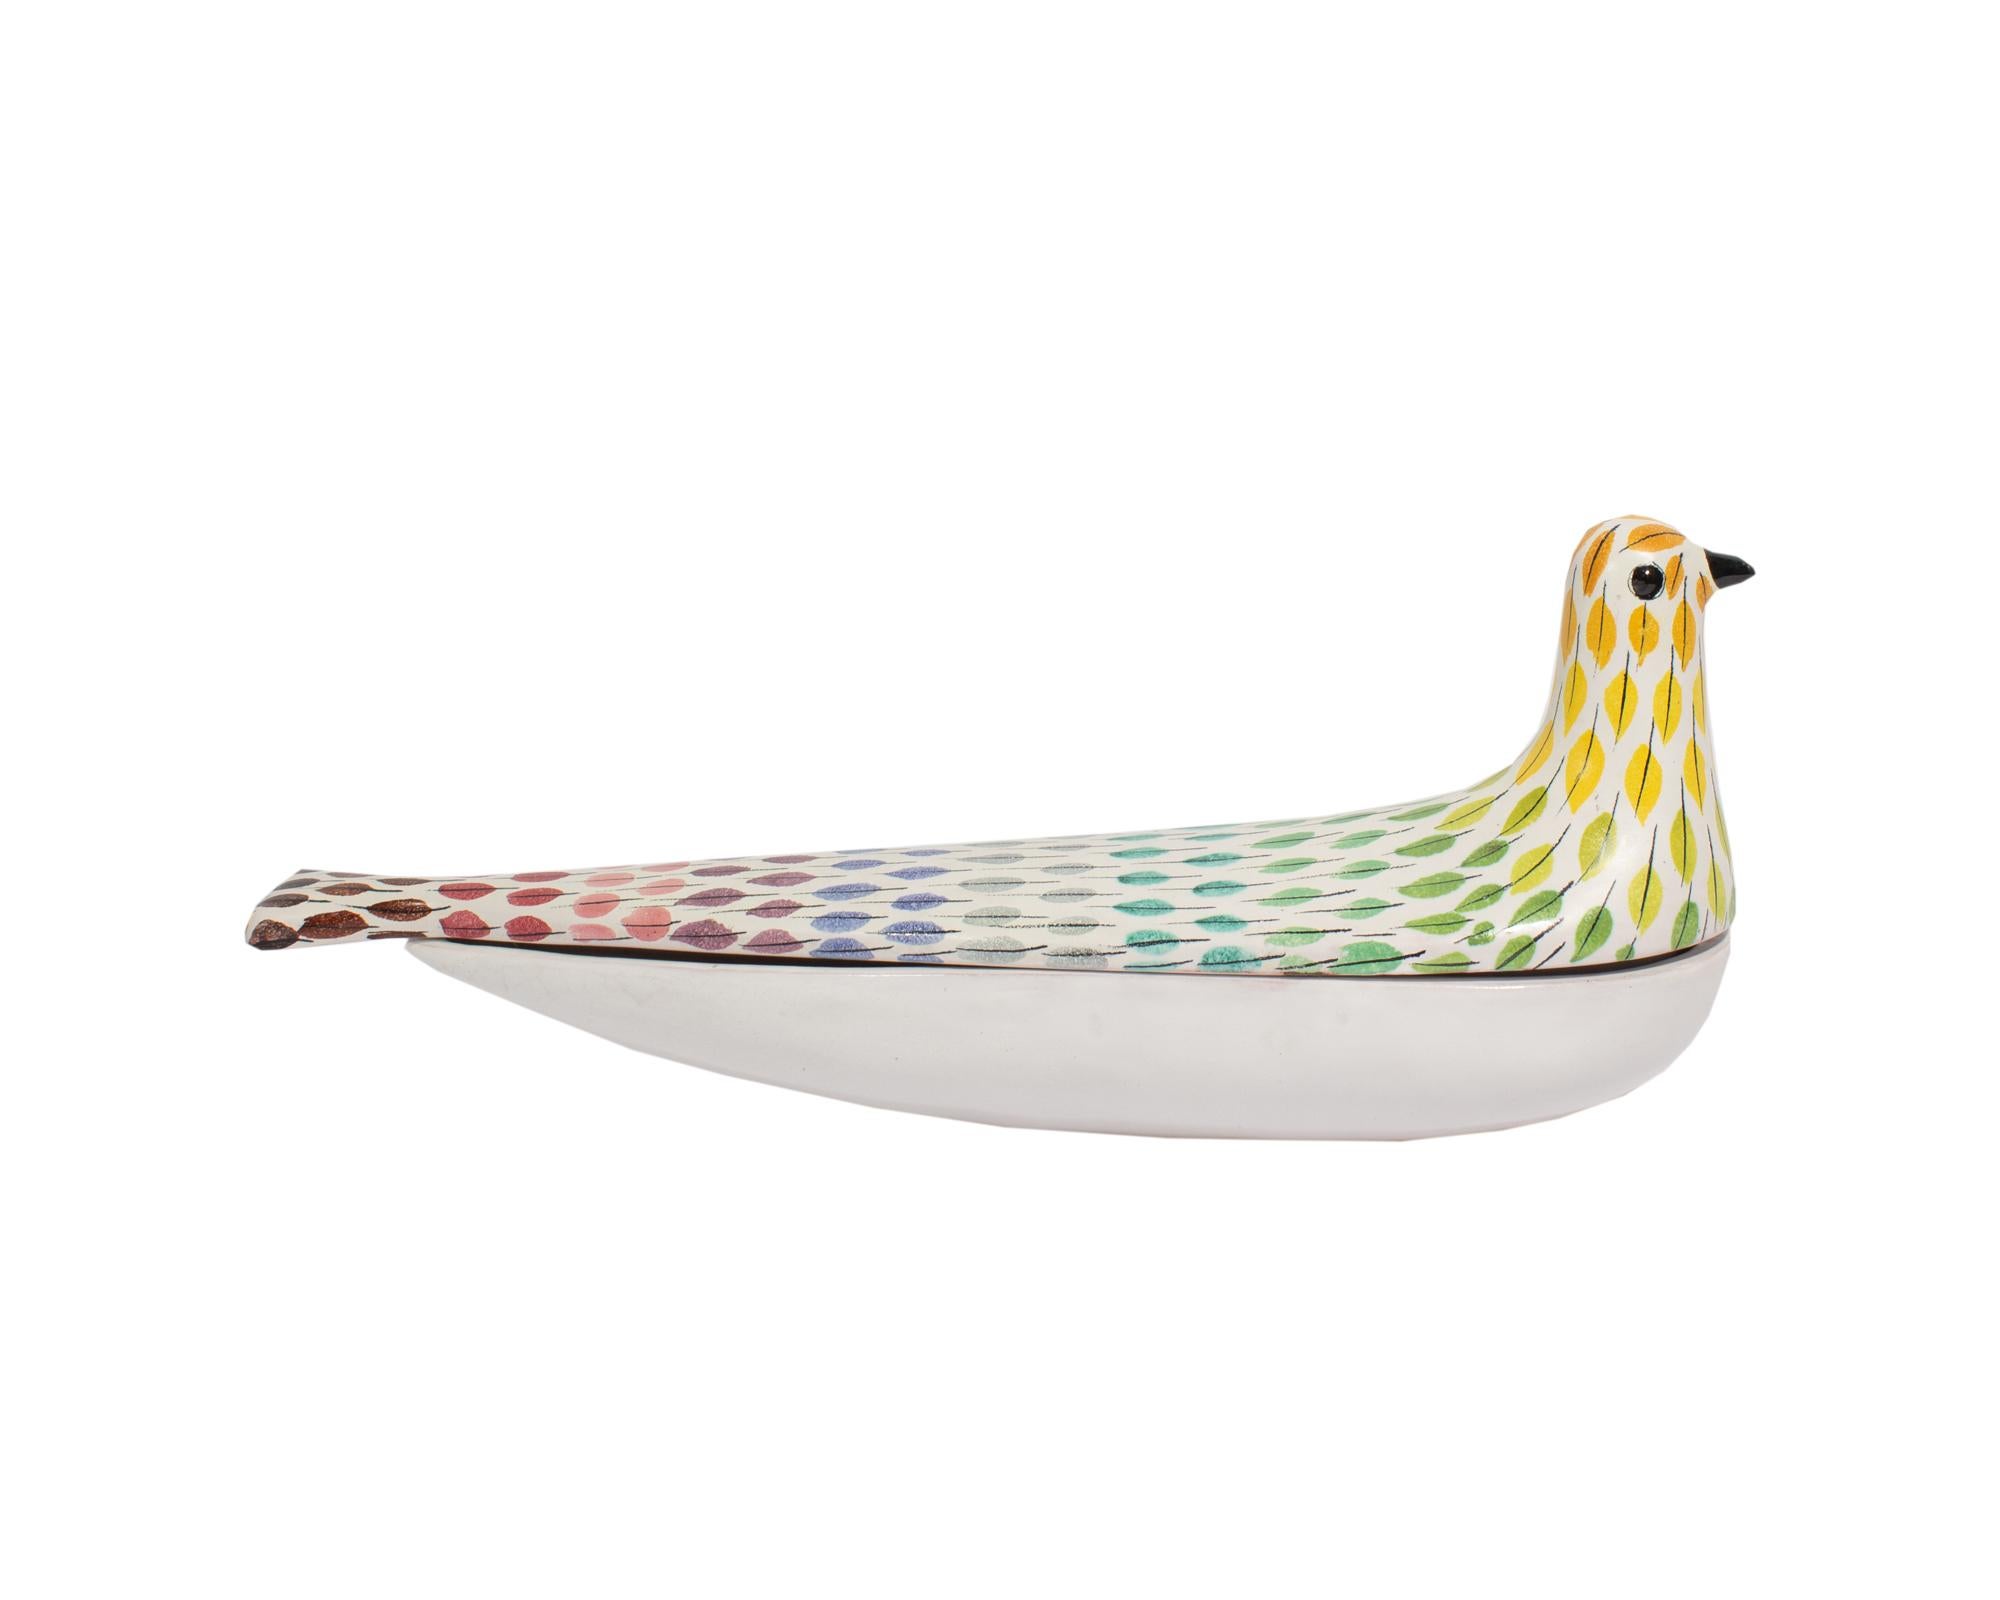 A box in the Piume pattern produced by Bitossi. Made in Italy, this box is in the shape of a bird with a rainbow feather design throughout. The lower part of the box is teardrop-shaped and is solid white. The underside of the box is marked 